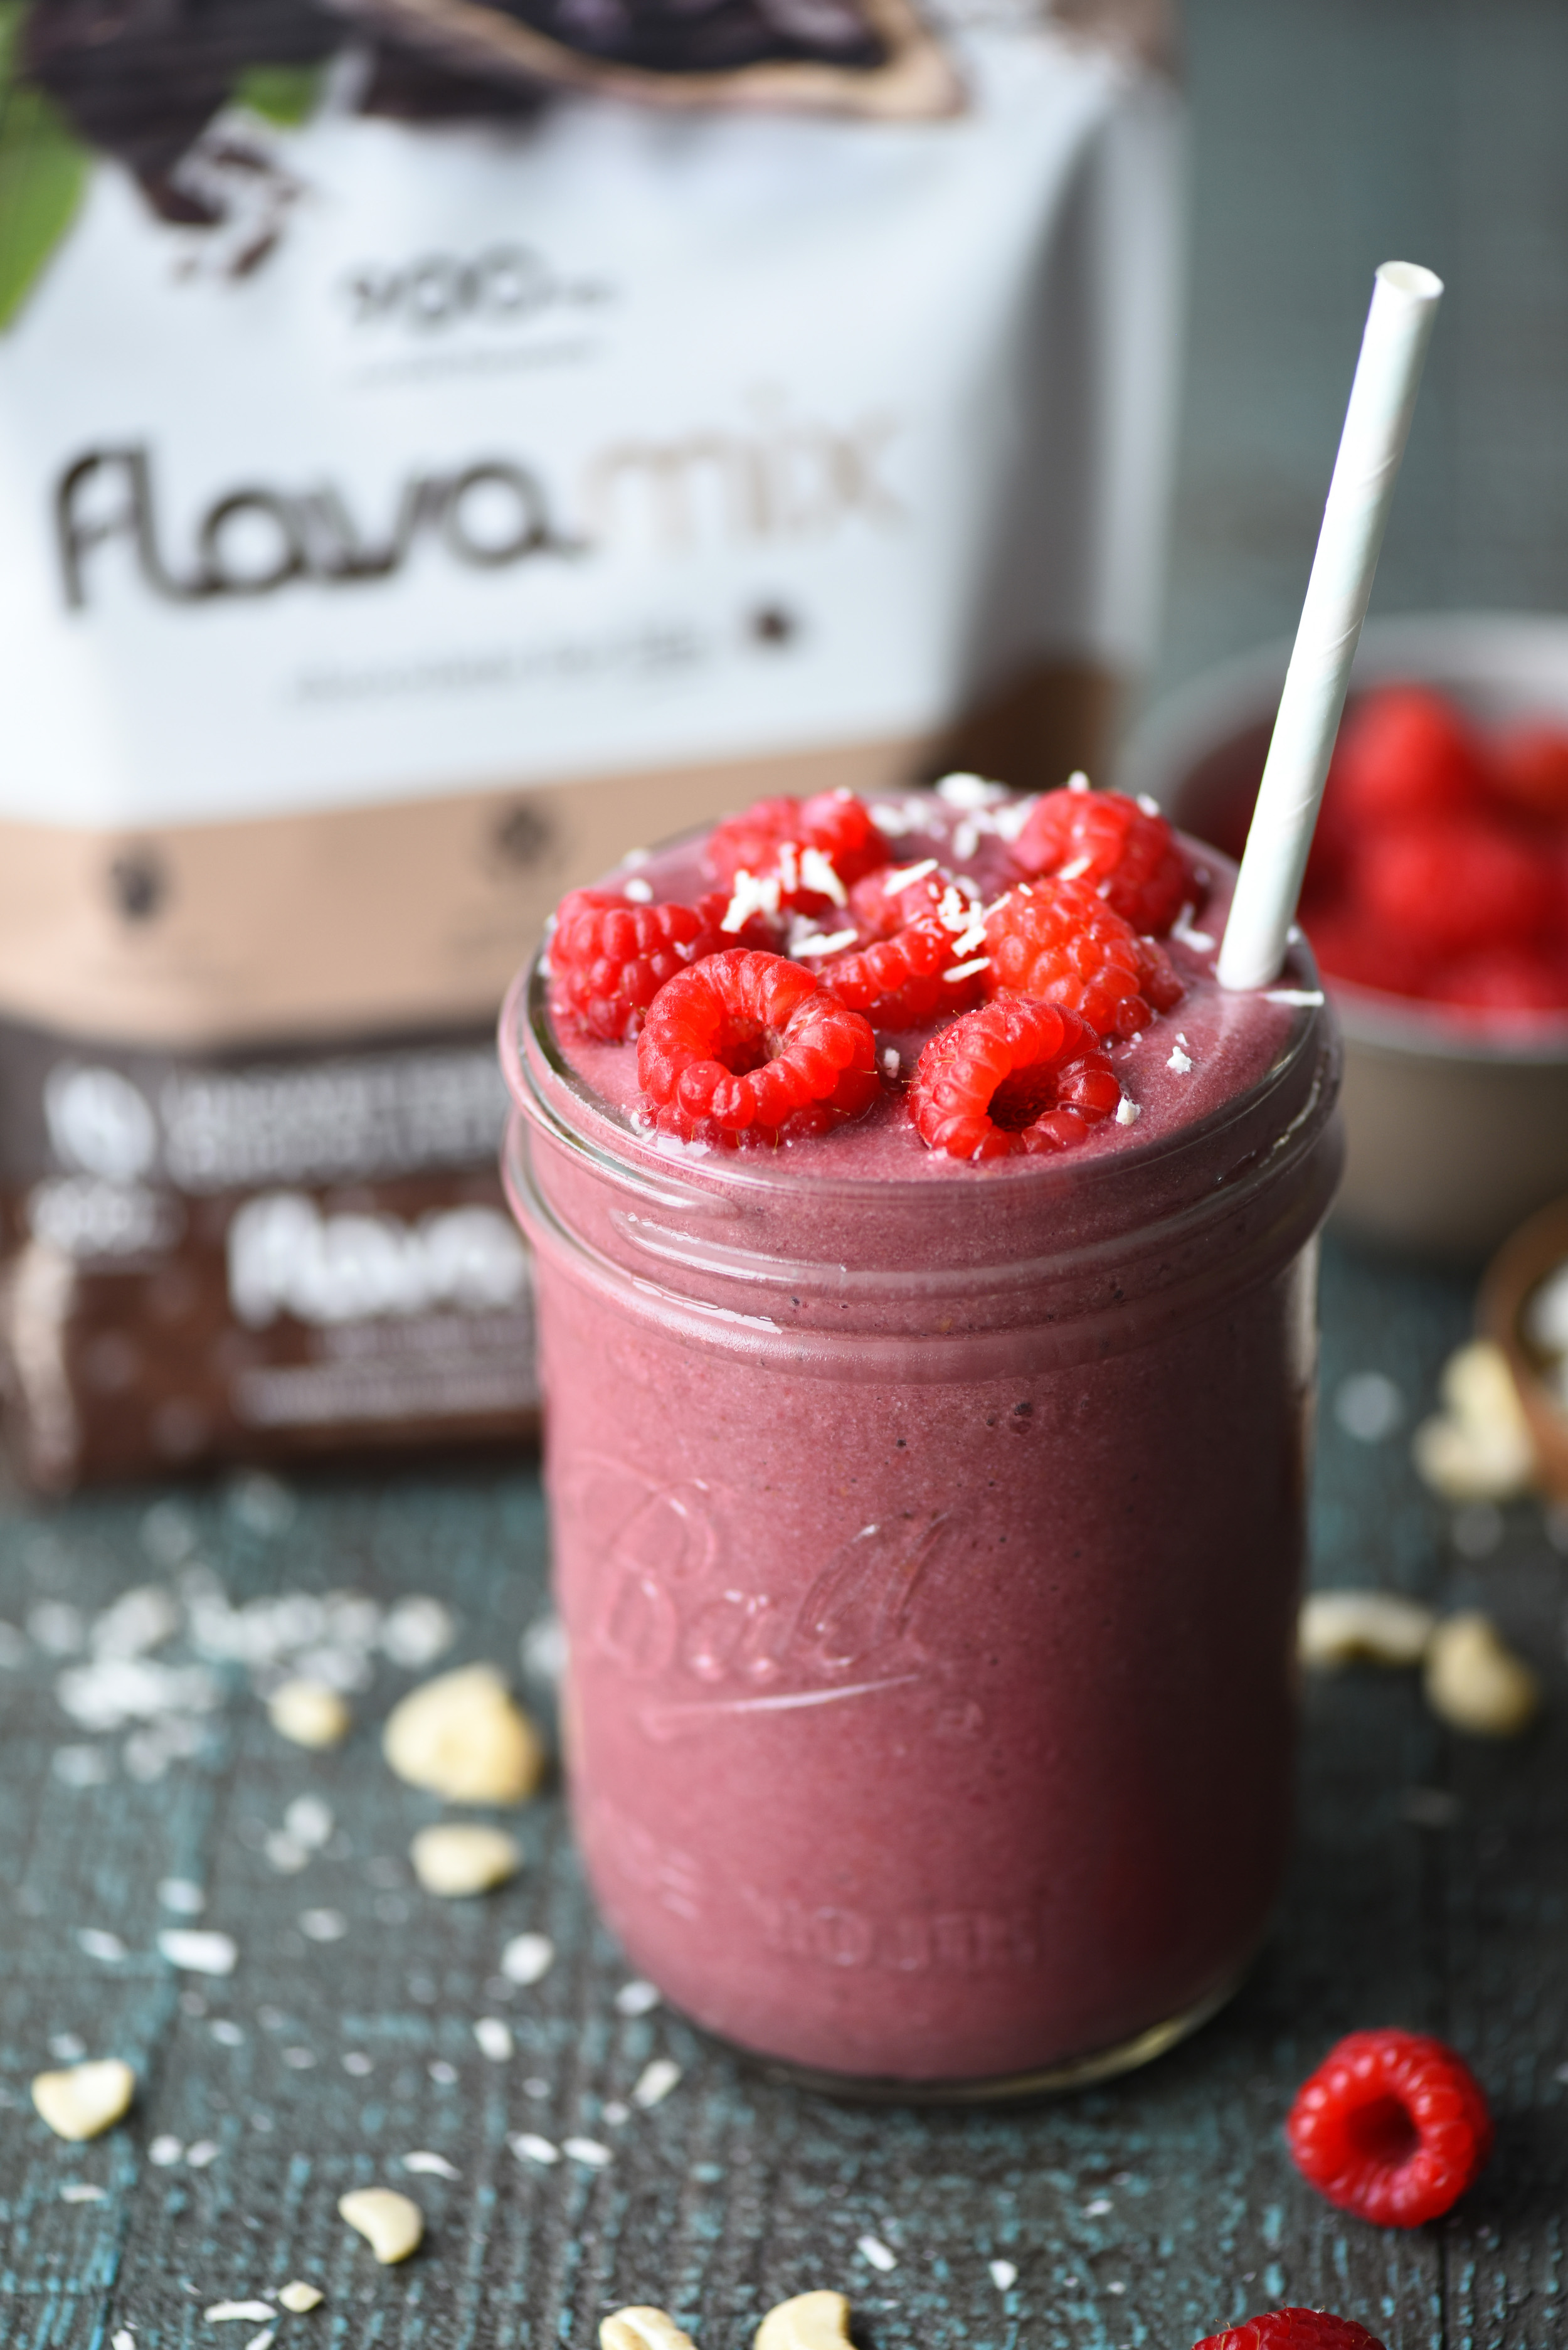 Raspberry Cashew Coconut Smoothie Recipe with FlavaMix Unsweetened Drinking Chocolate, 900mg Cocoa Flavanols